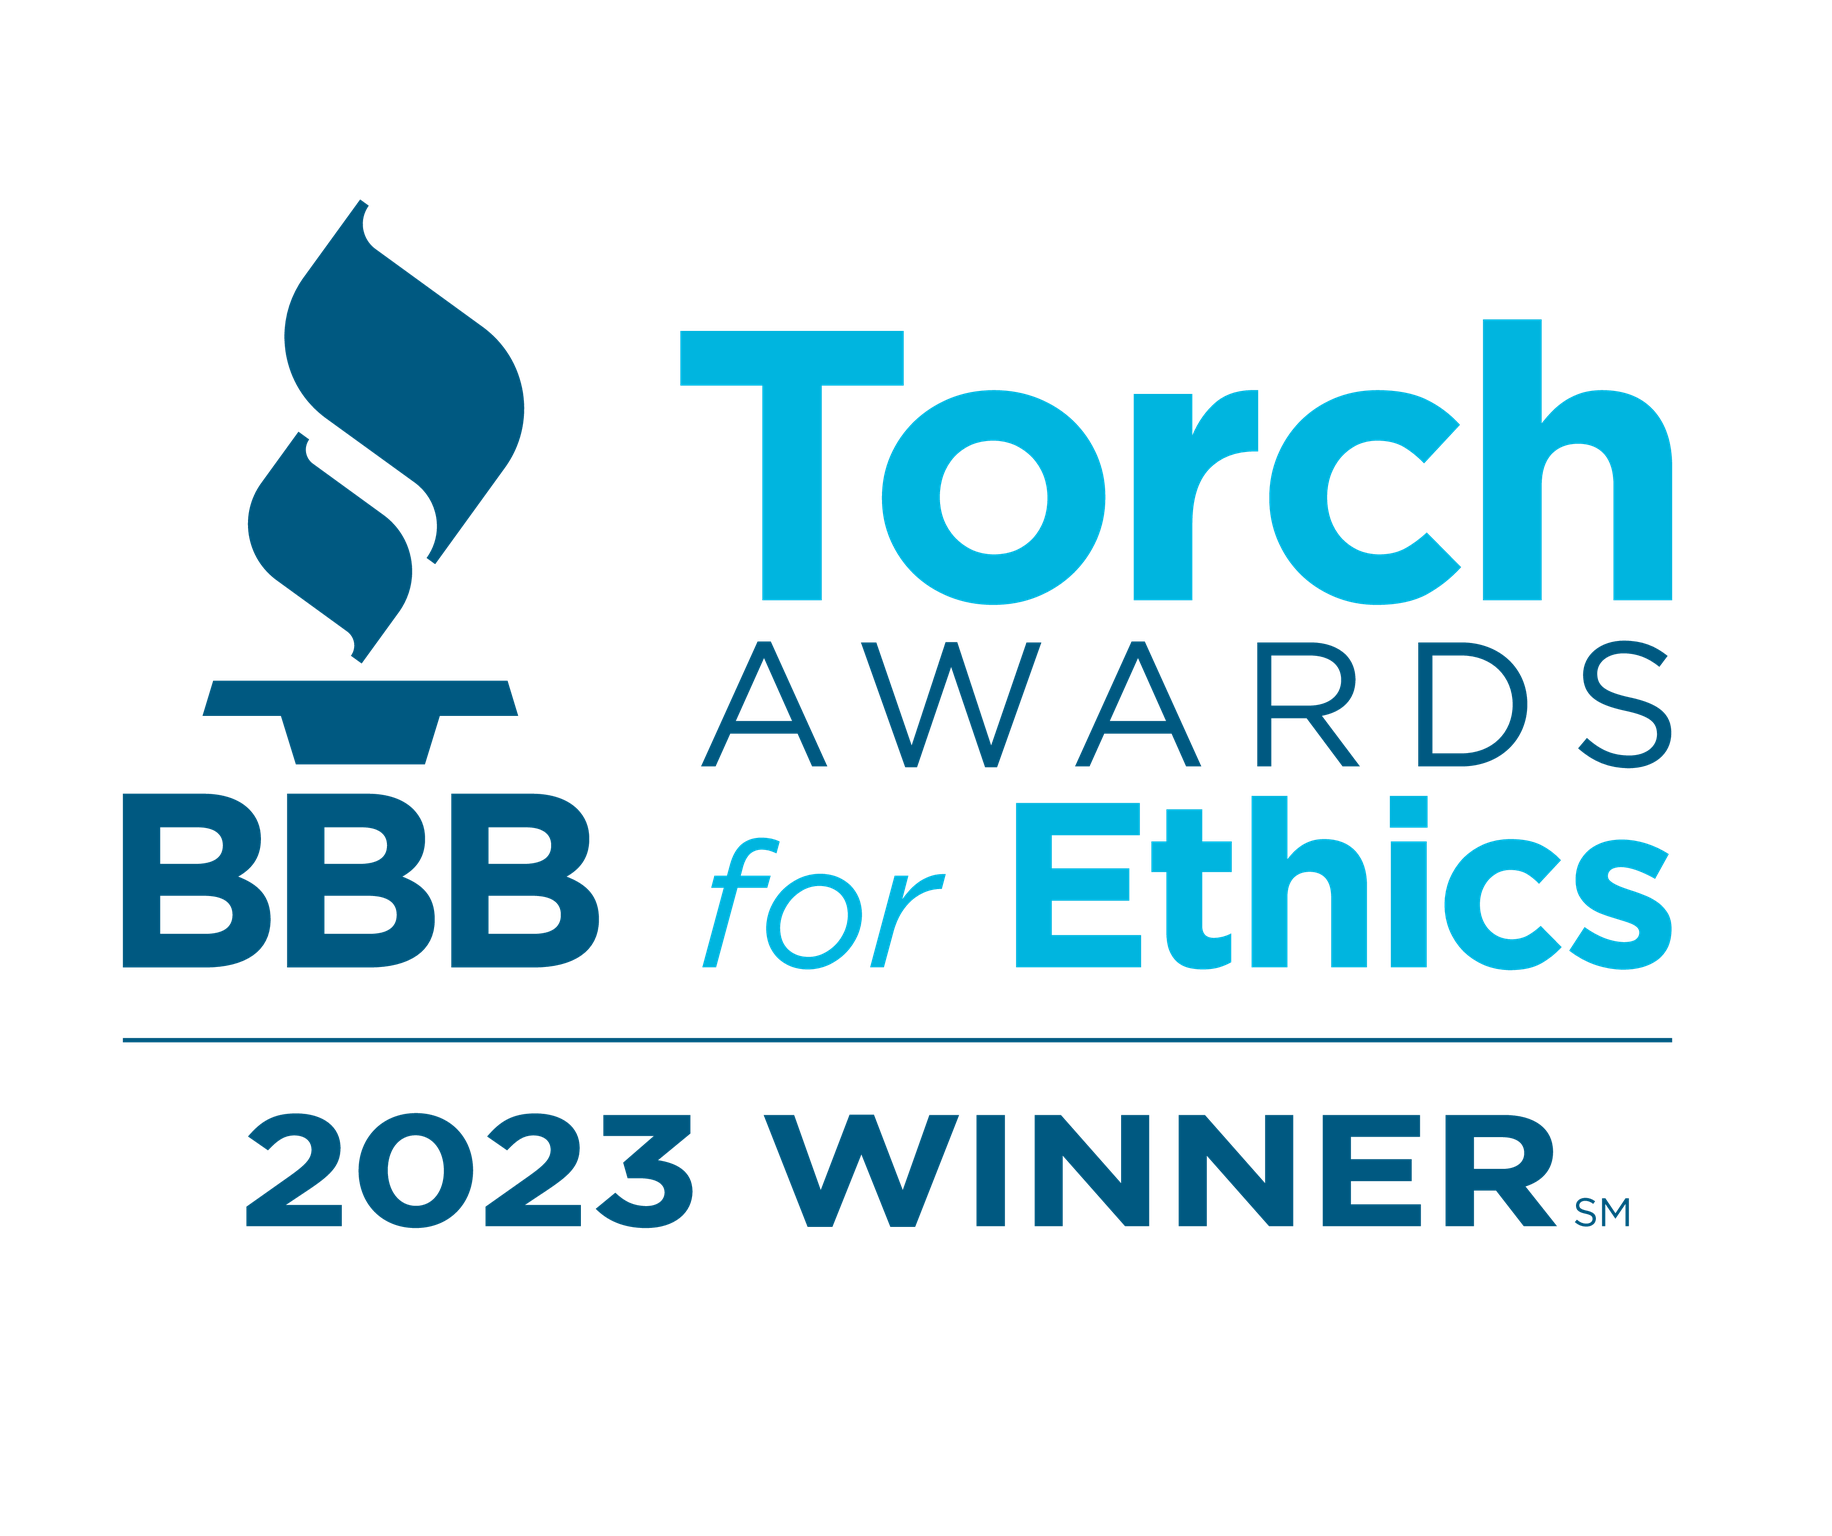 BBB Torch Award for Ethics